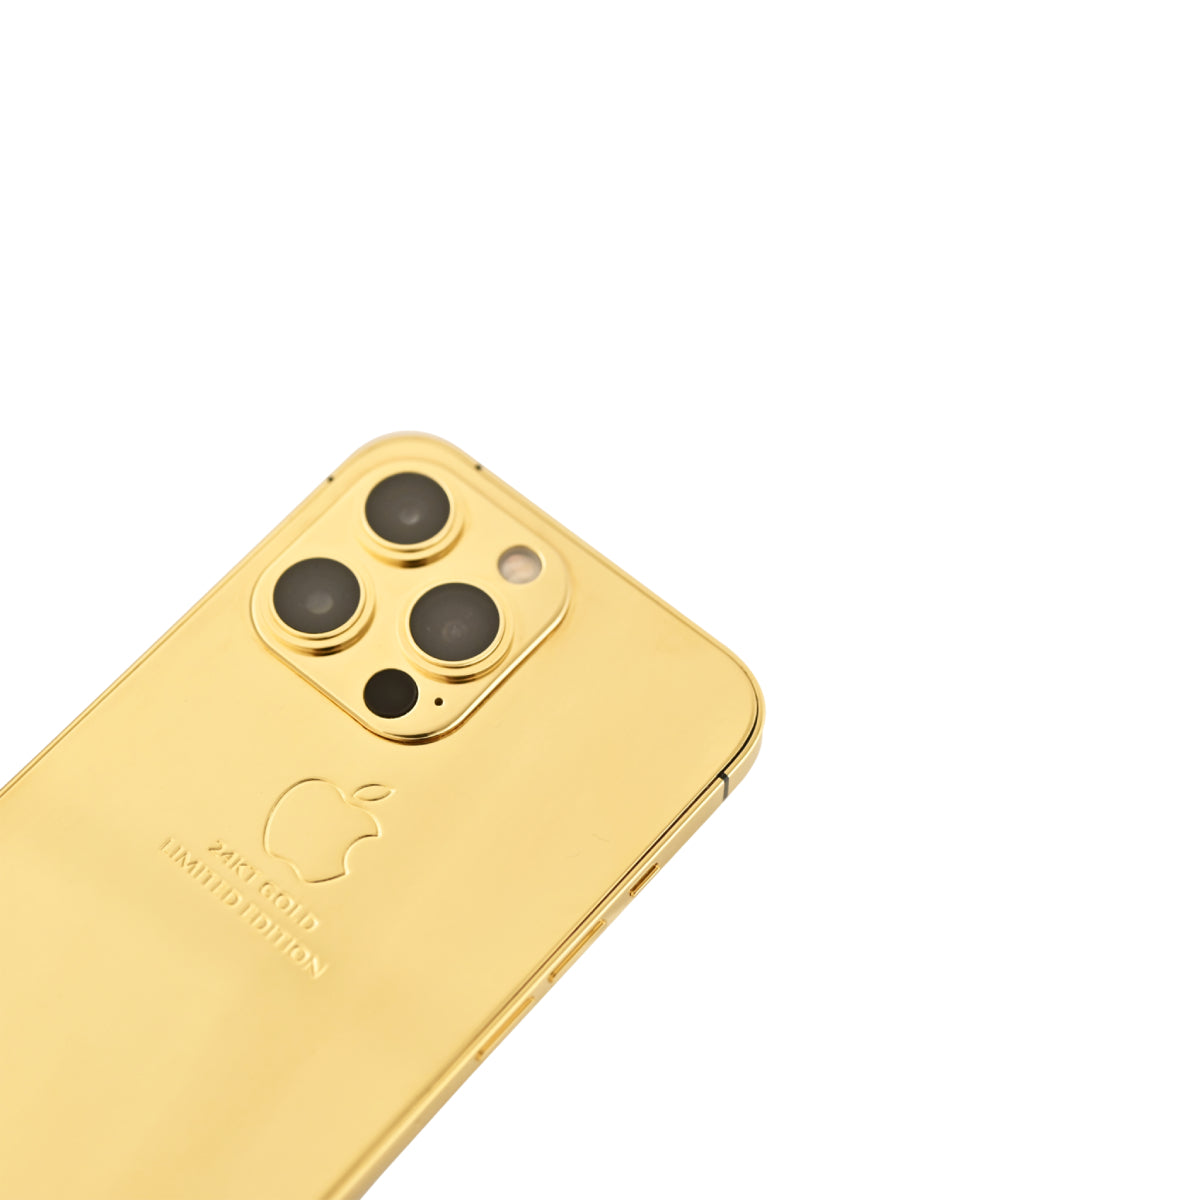 Caviar Luxury 24k Full Gold Customized iPhone 13 Pro 1 TB Limited Edition